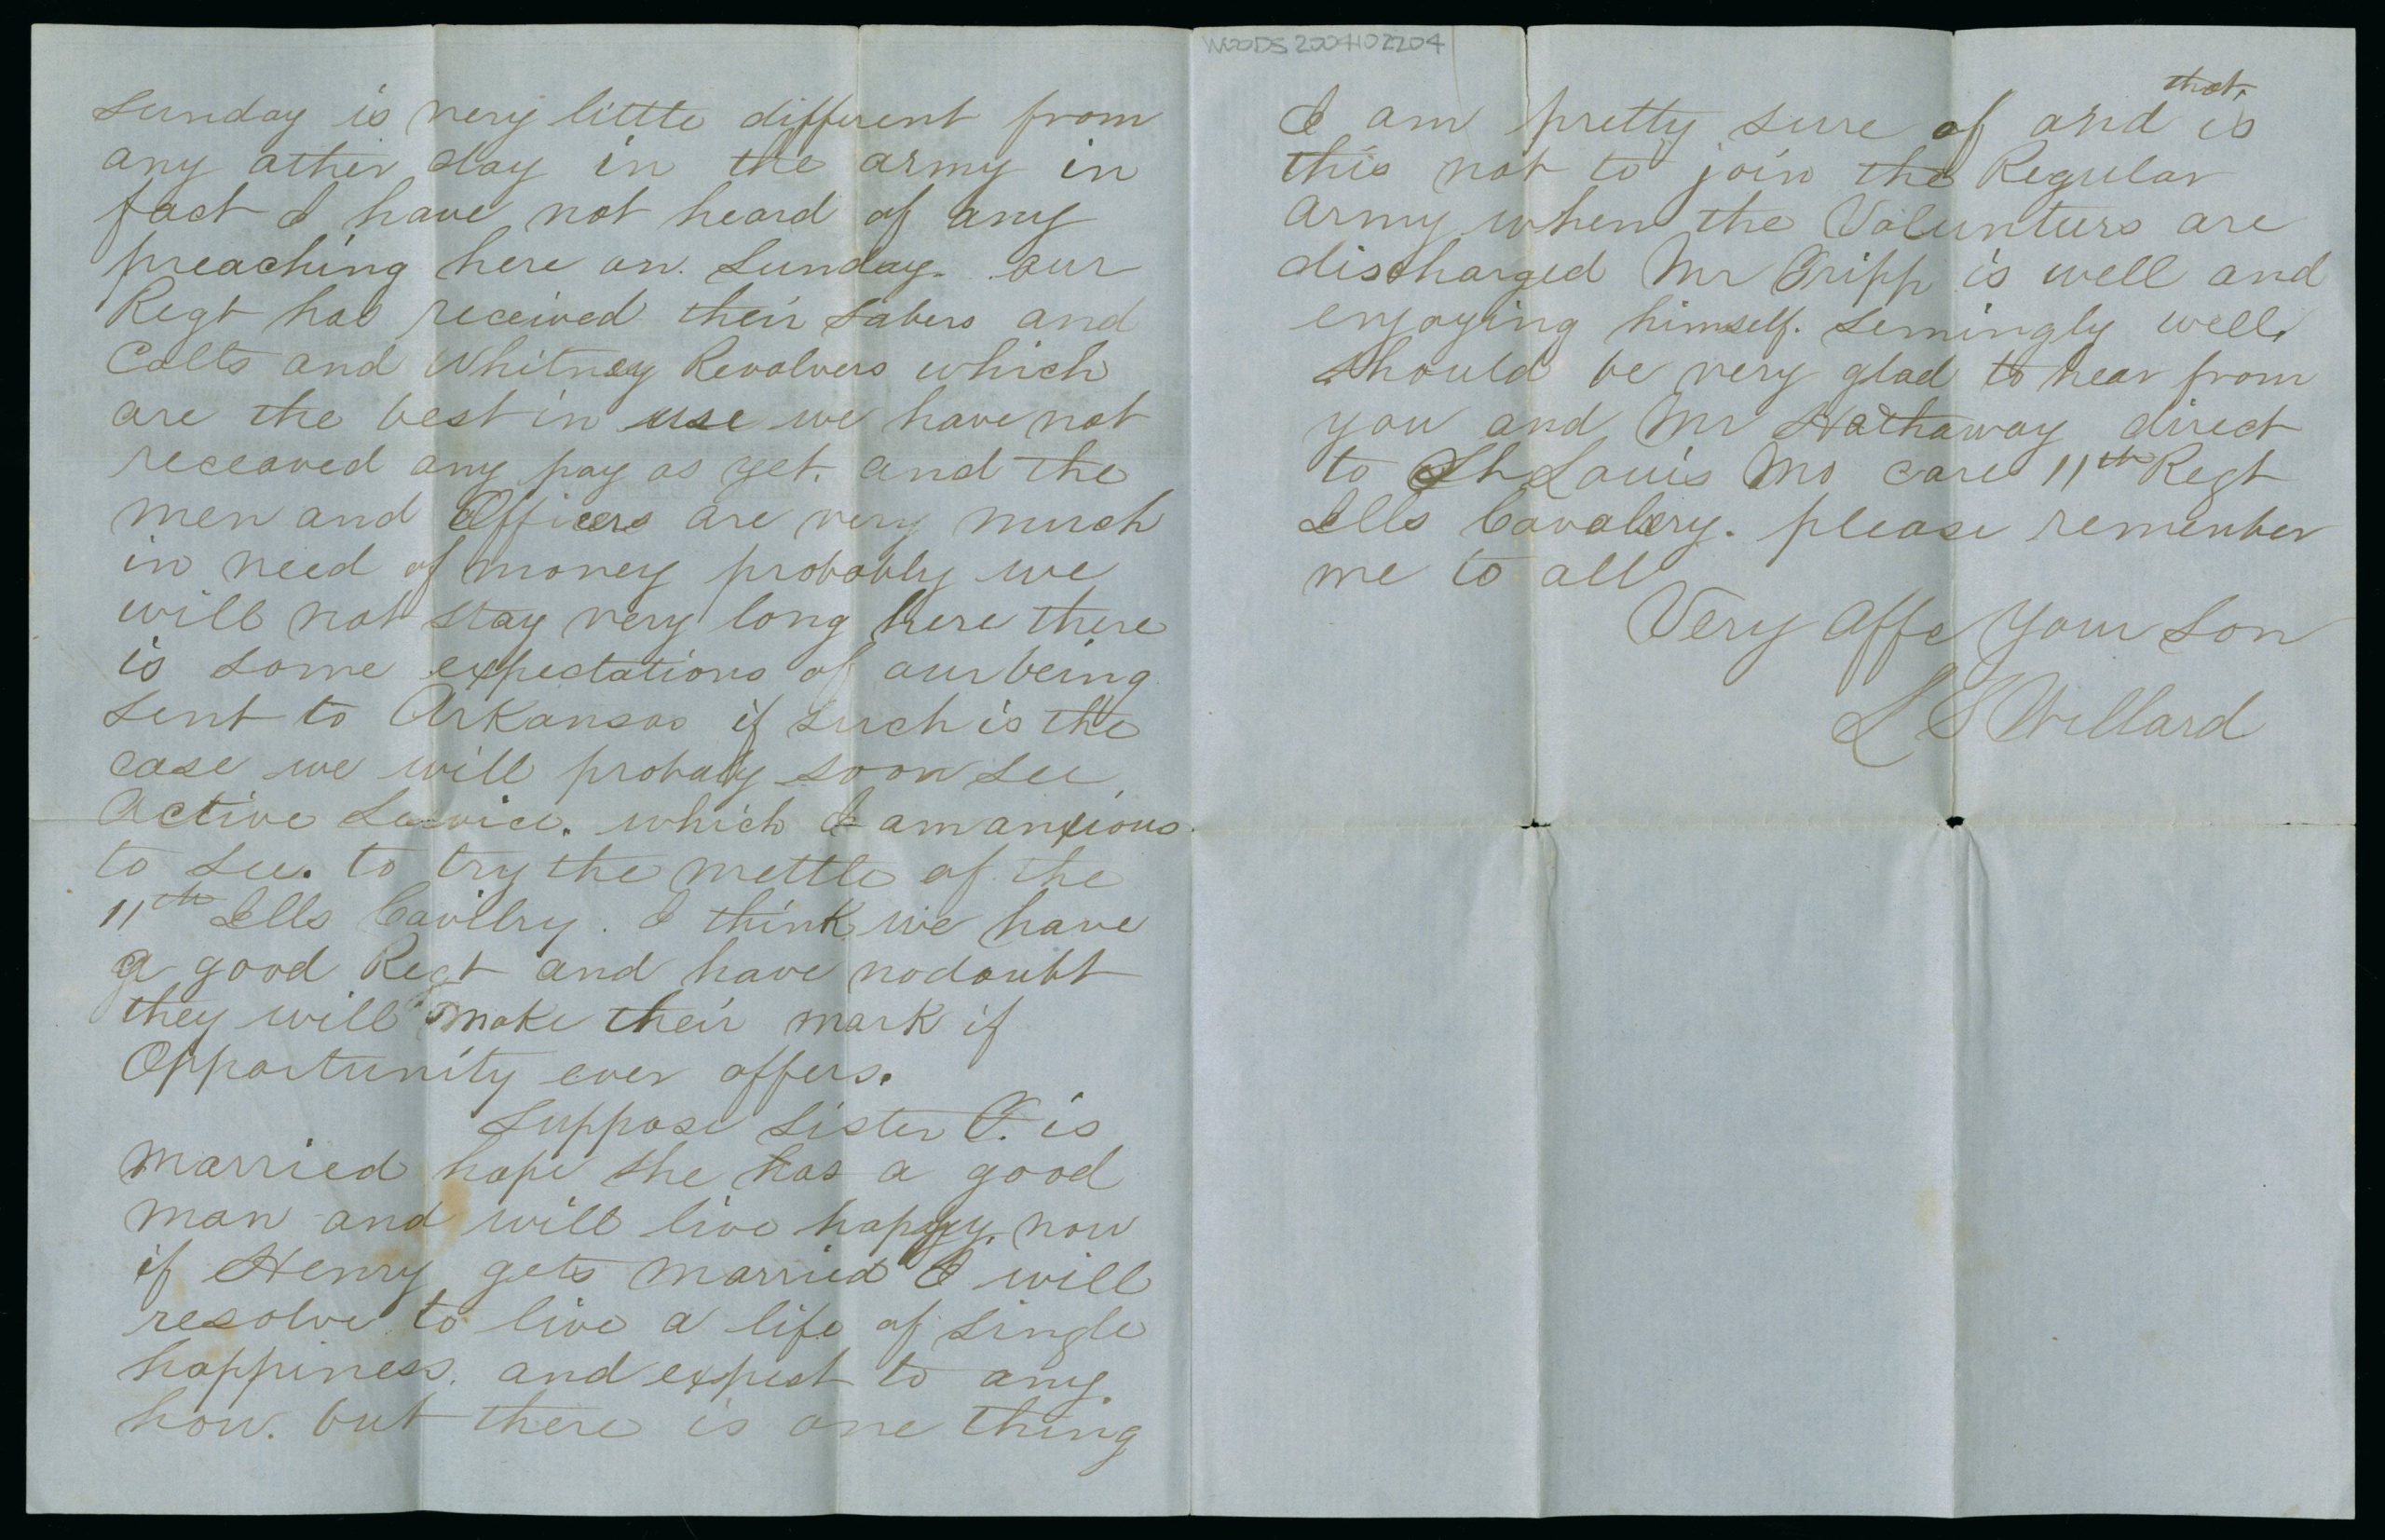 Handwritten letter in cursive. Brown in ink on blue paper. Two columns of text.